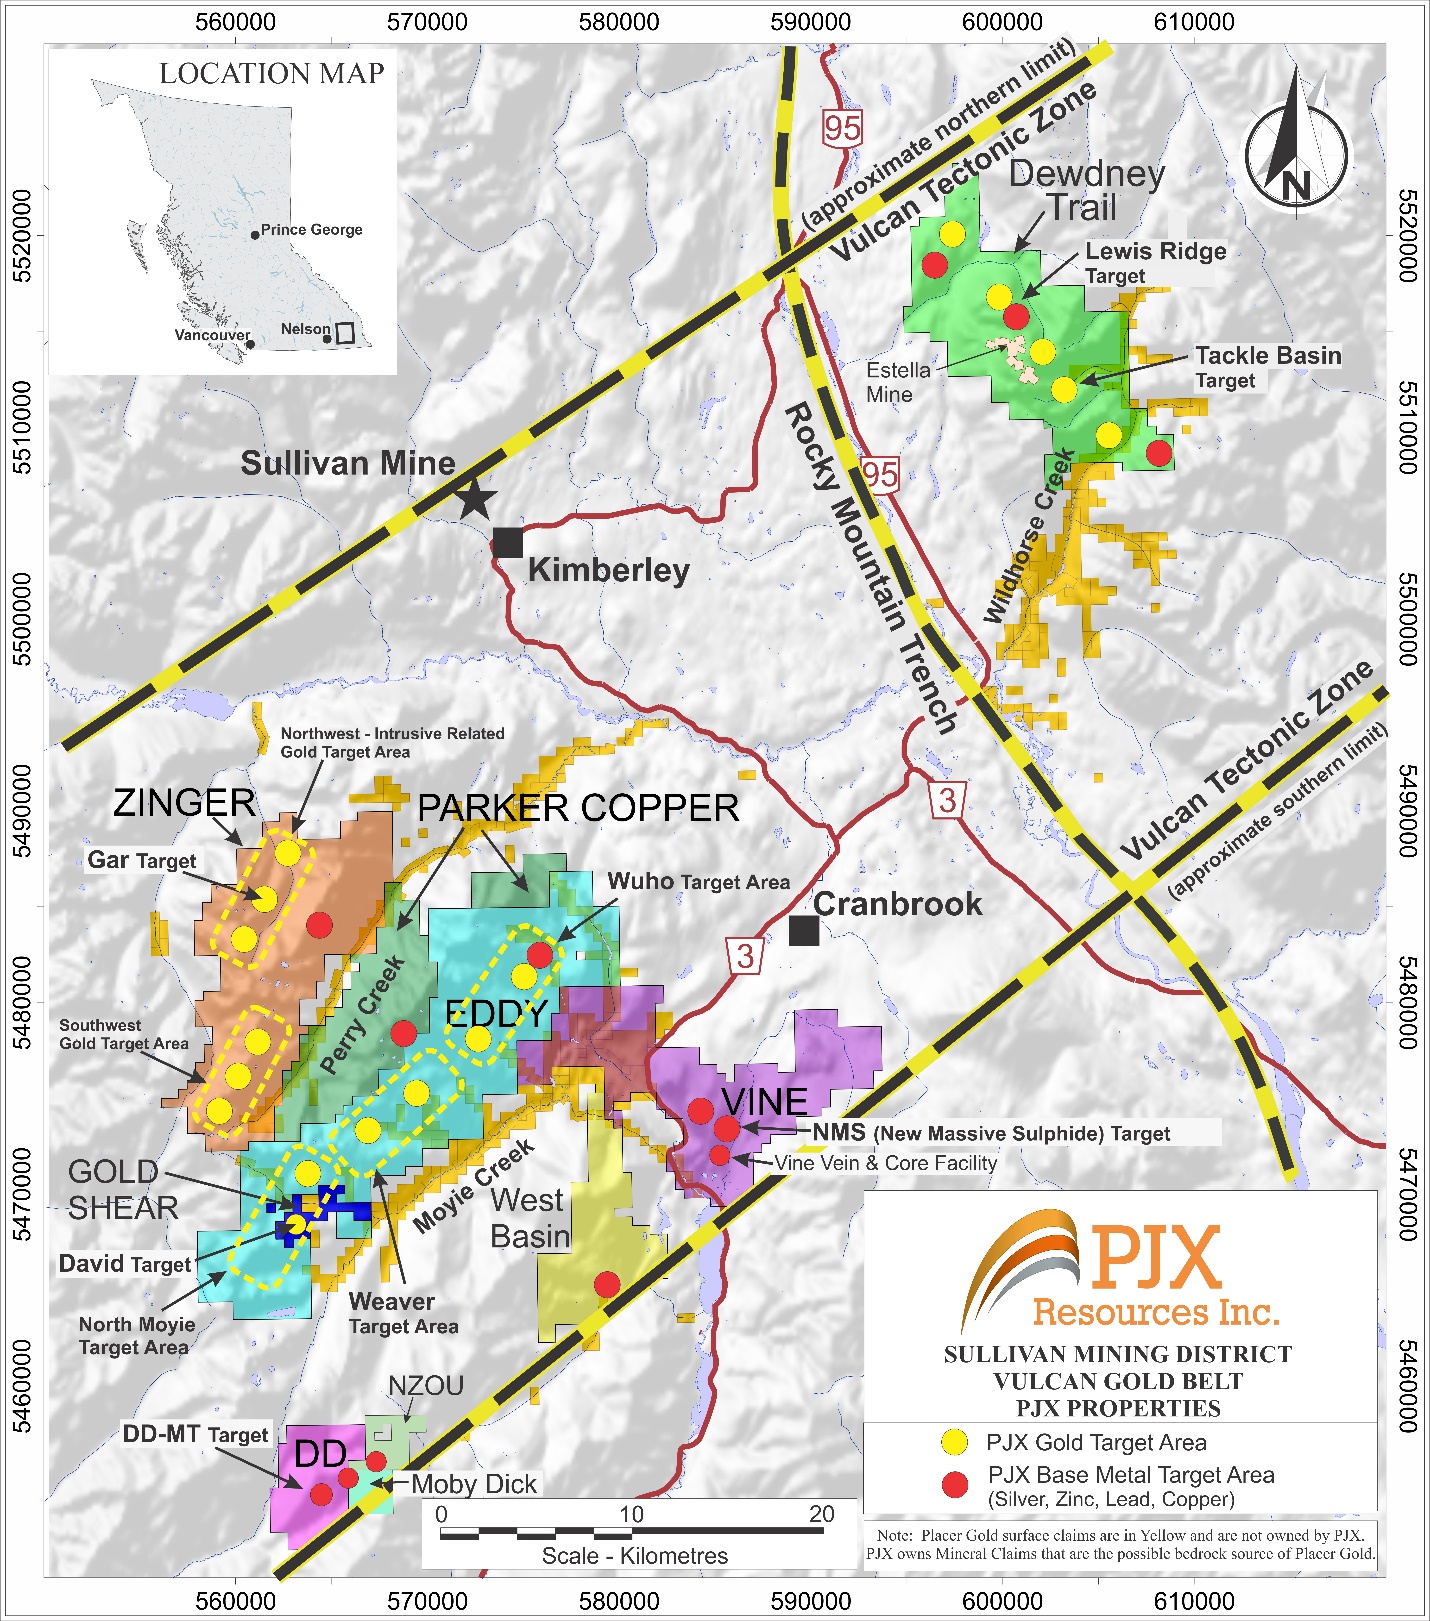 PJX Resources Inc., Friday, May 20, 2022, Press release picture